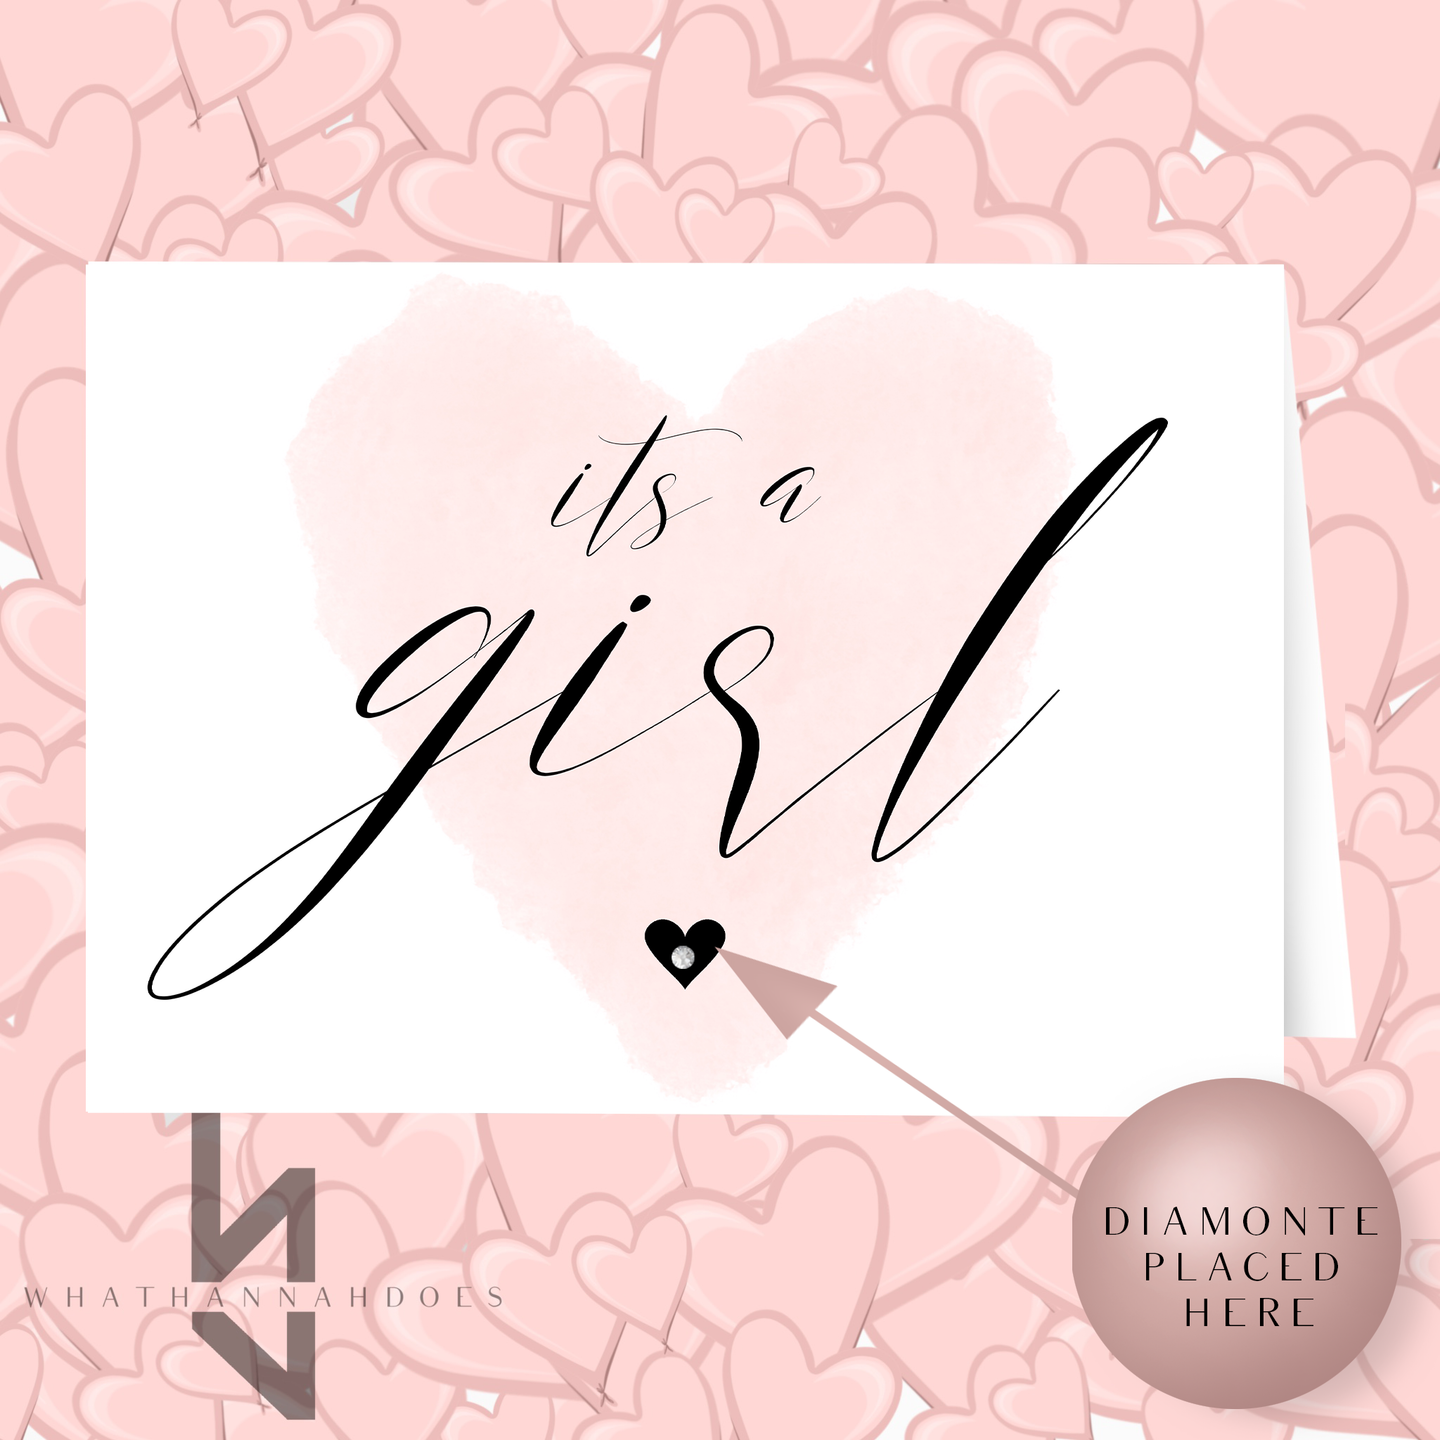 Its A Girl A5 Card With Diamonte Heart